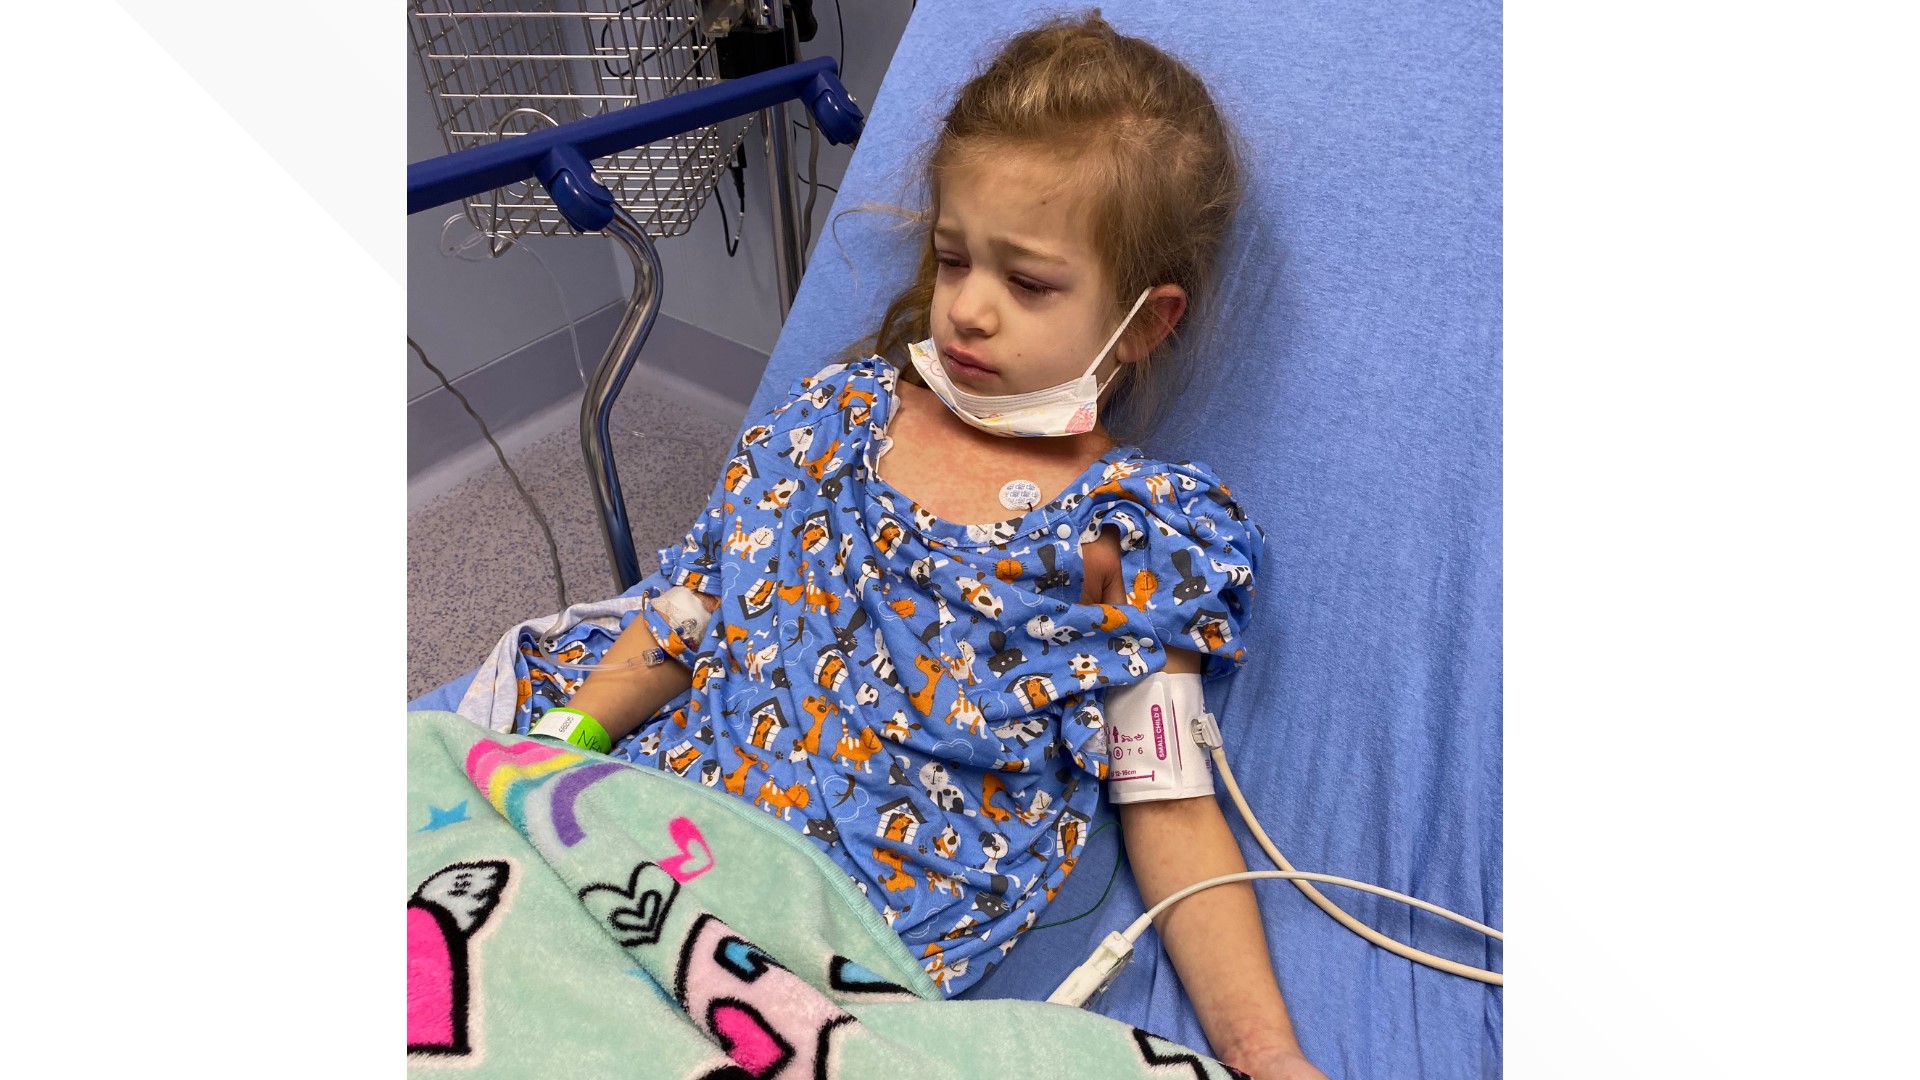 Peyton Copeland, 5, contracted COVID-19 in November. About a month later, her mom says she fell ill again, but this time with something she'd never heard of: MIS-C.